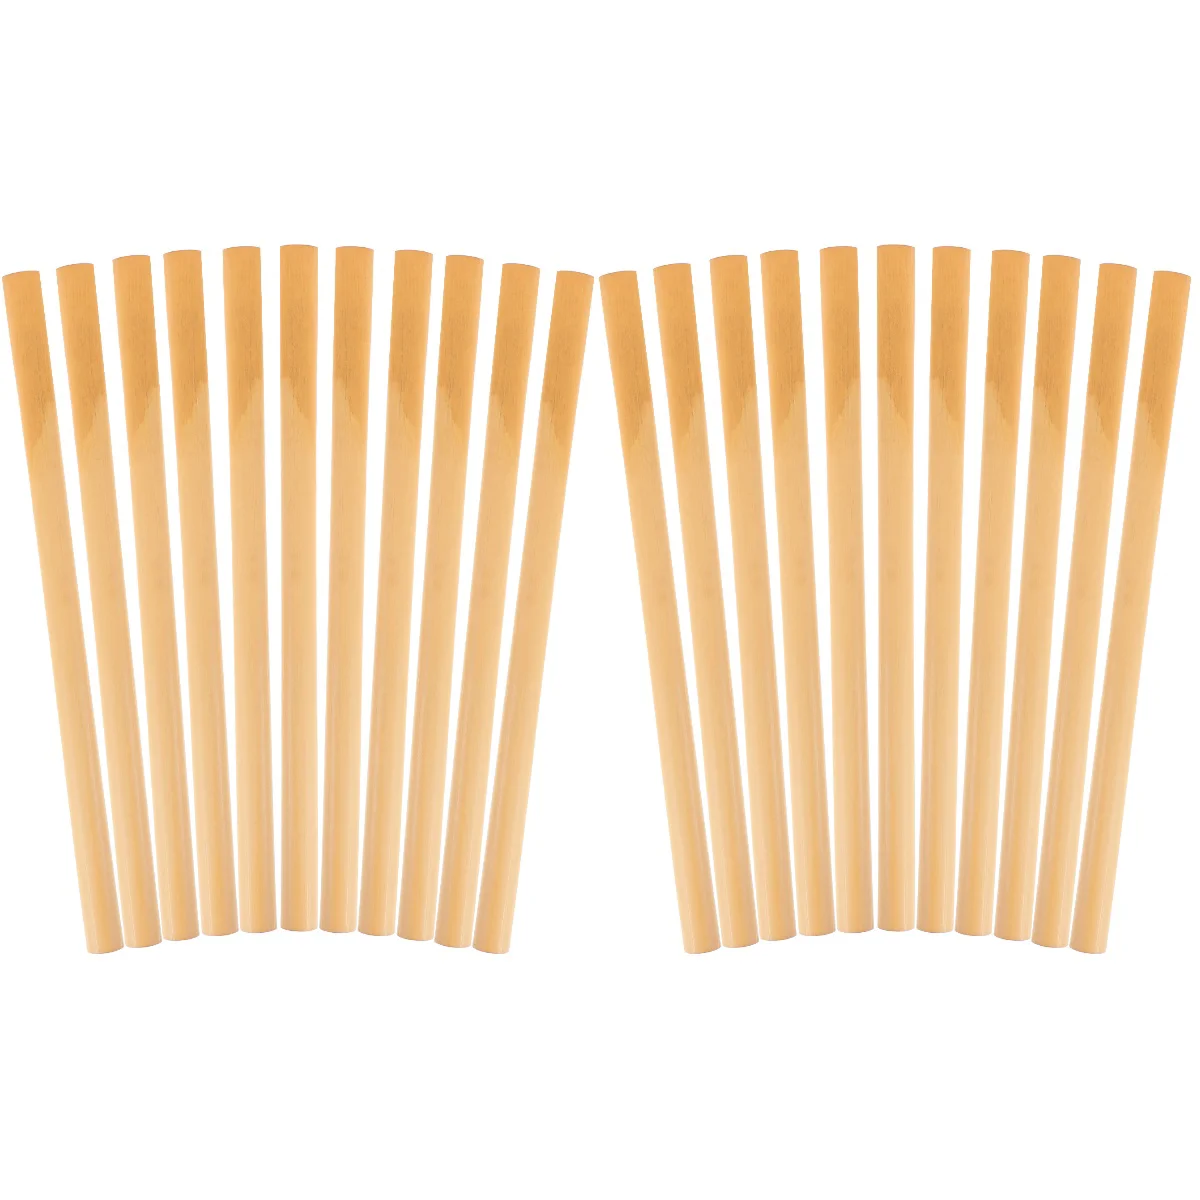 

100 Pcs Bee Tube Mason Refill Reed Props Replacement Nesting Tubes Natural Pole Empty Bees